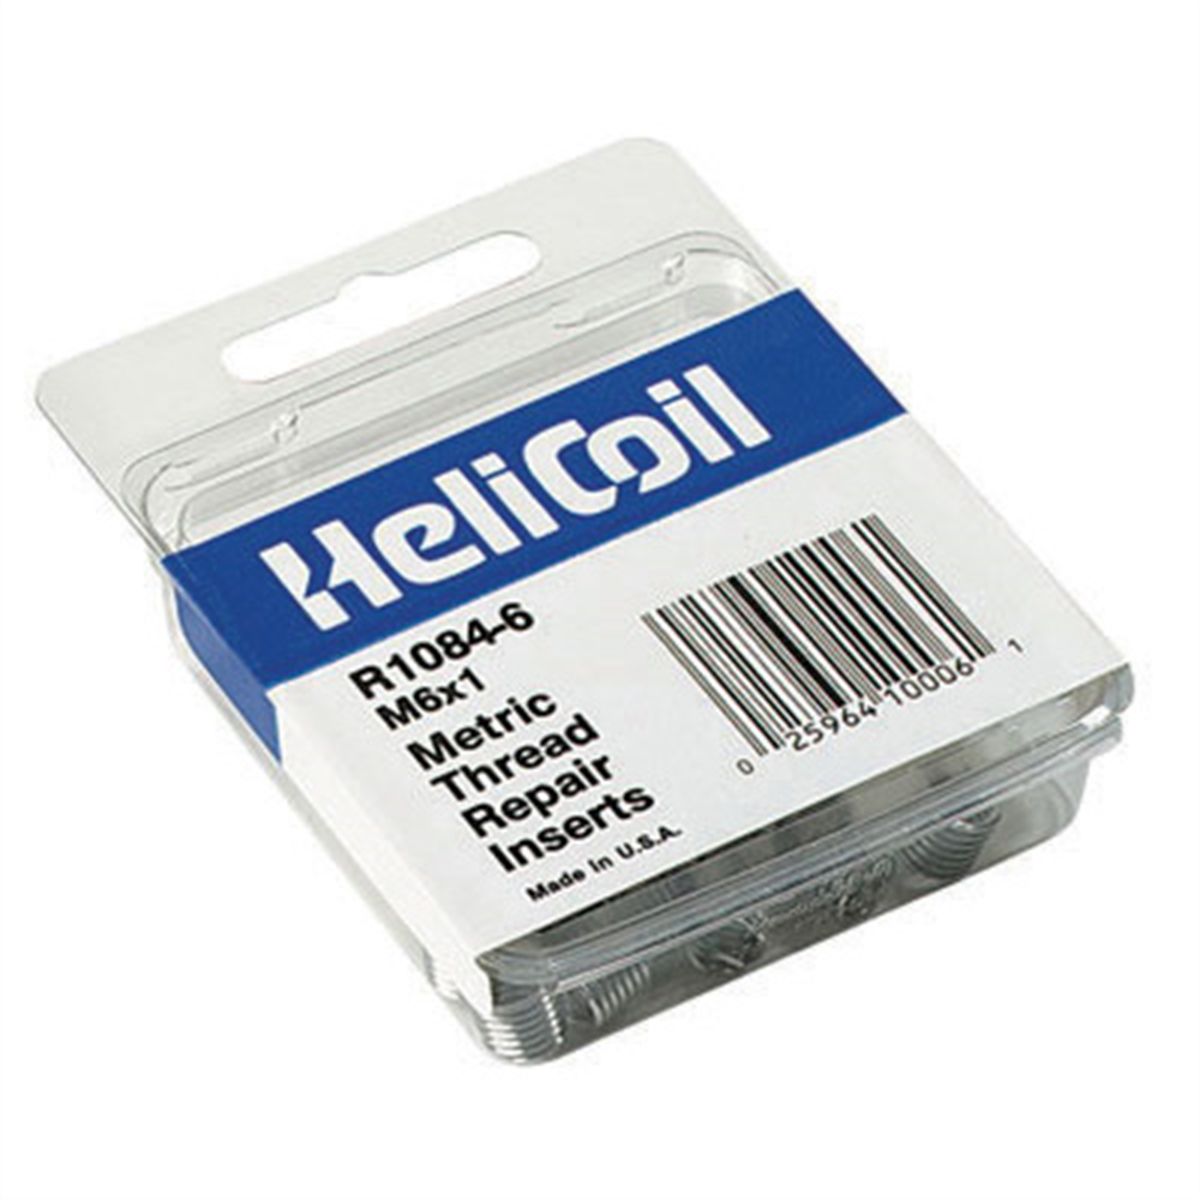 HELICOIL M6 x 1,0 x 9 Stainless Refill Pack